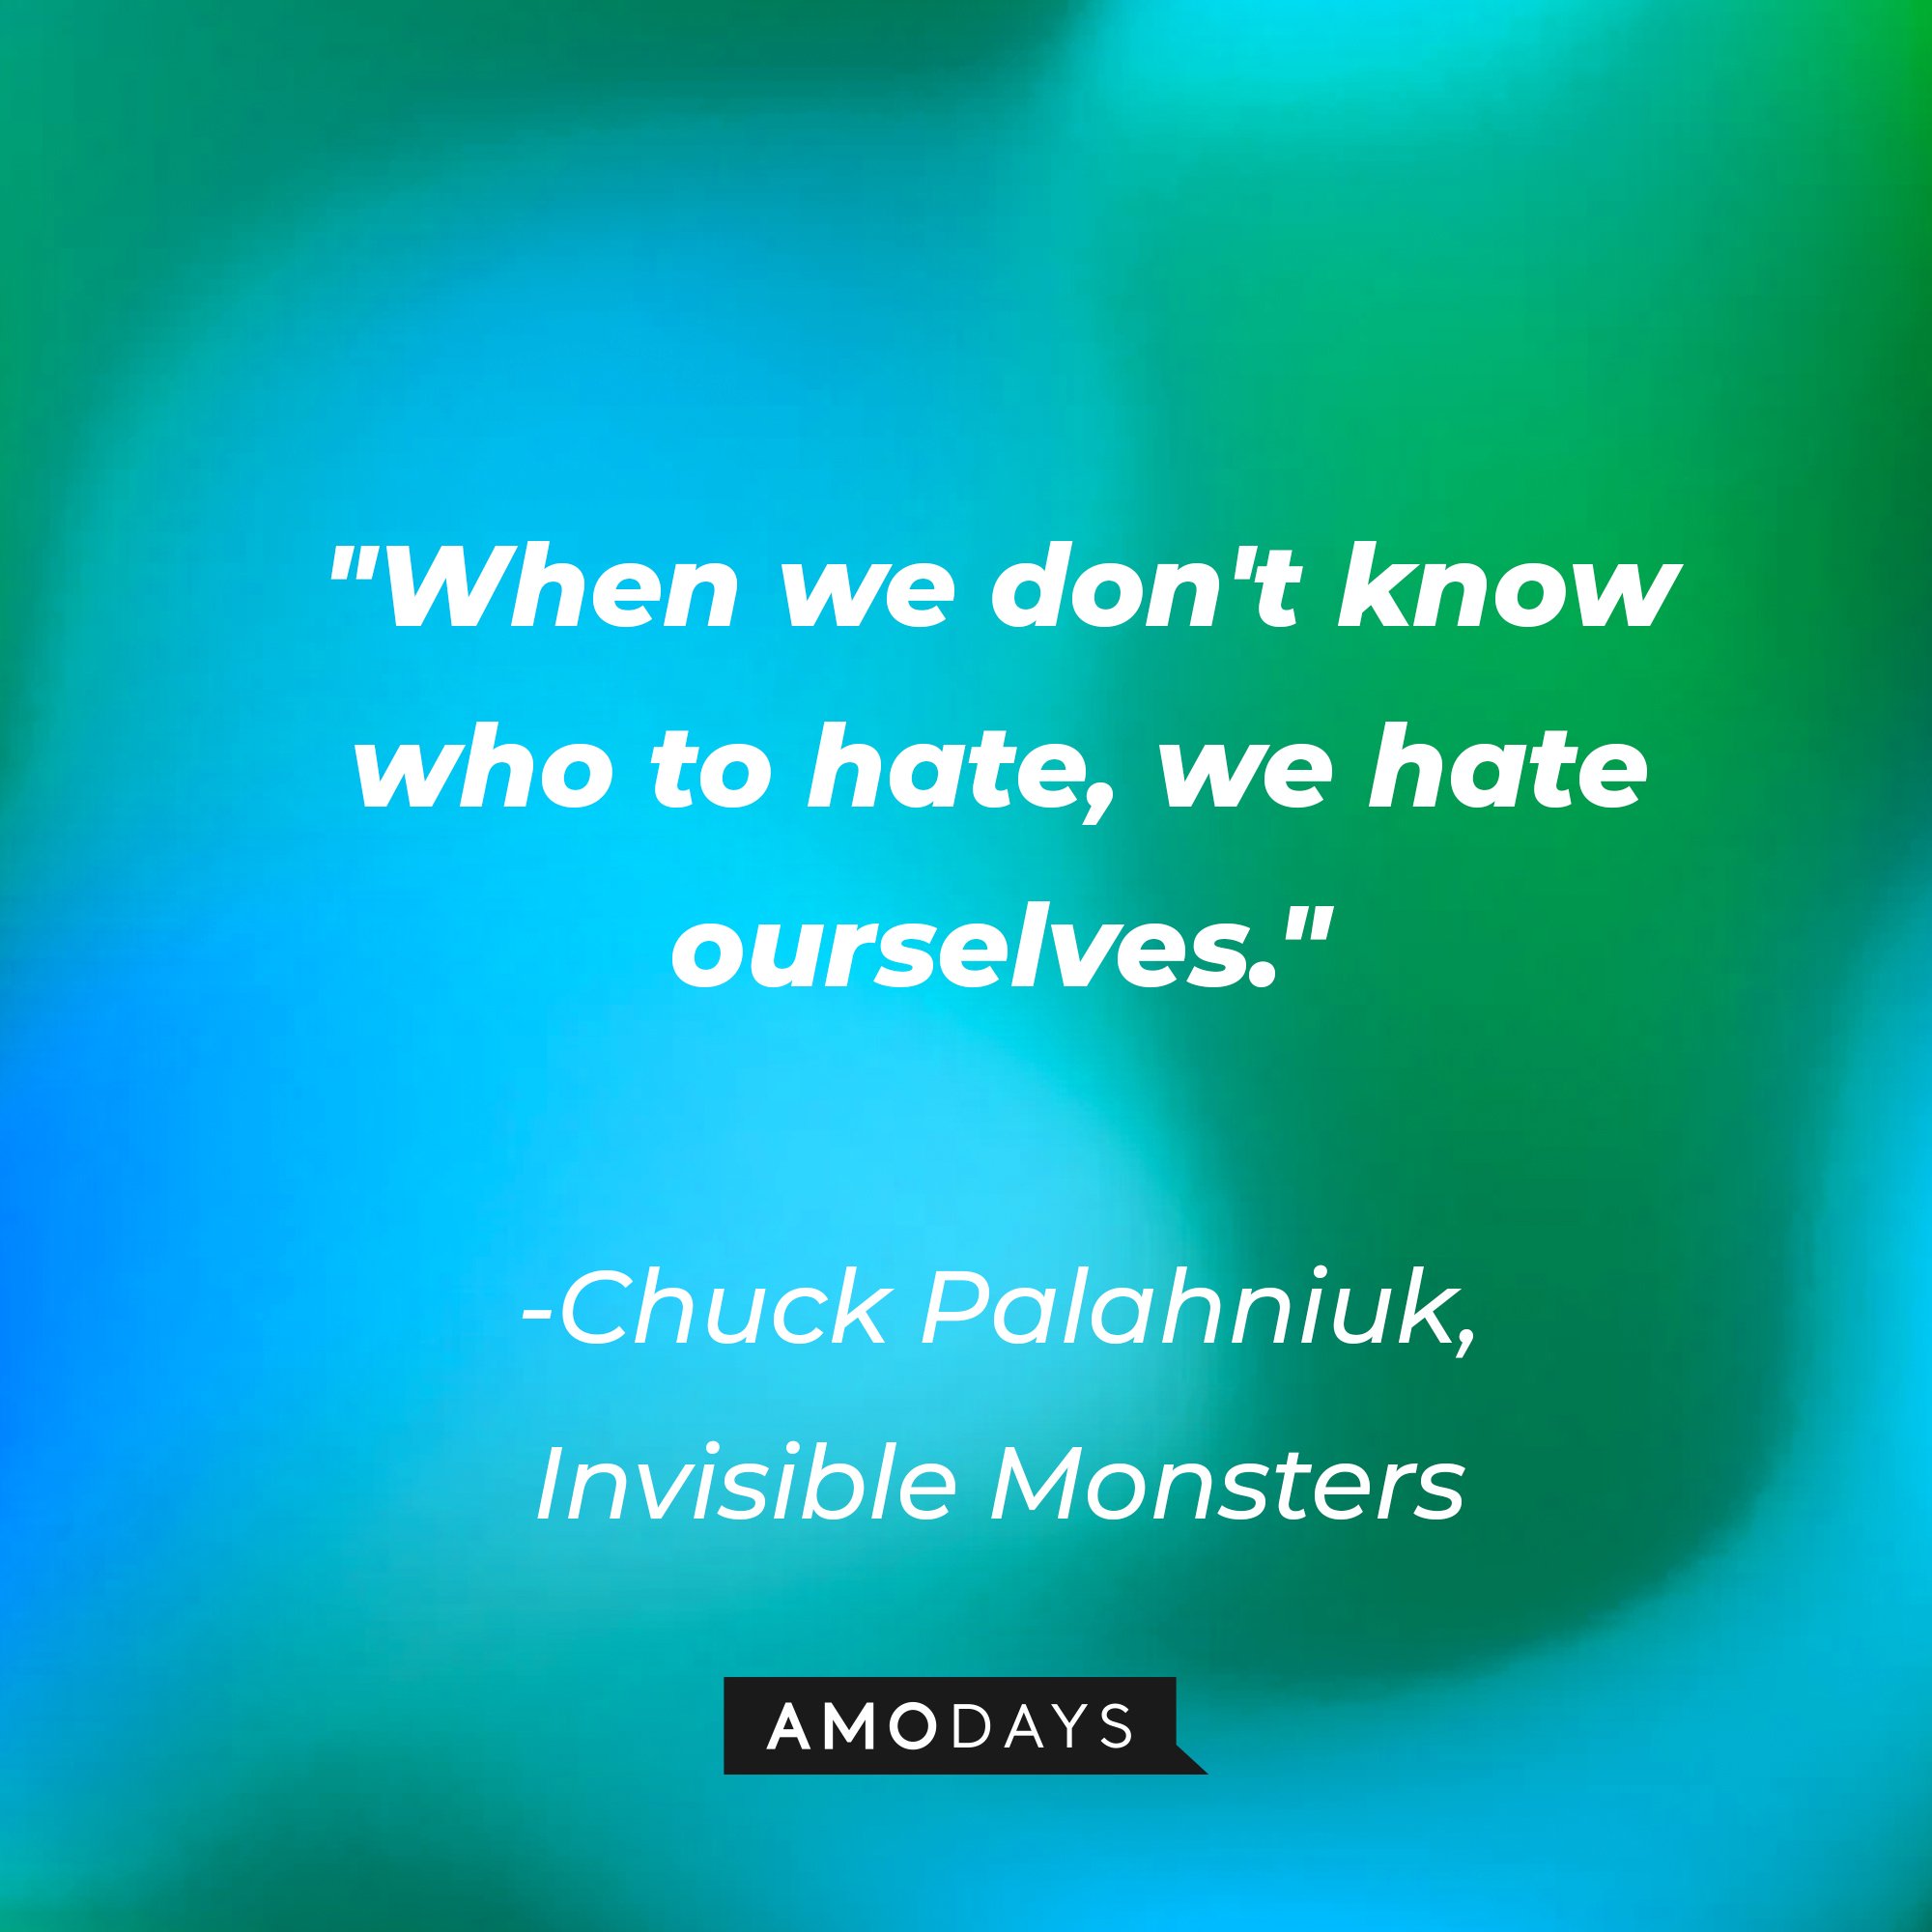 Chuck Palahniuk's quote: "When we don't know who to hate, we hate ourselves." | Image: Amodays